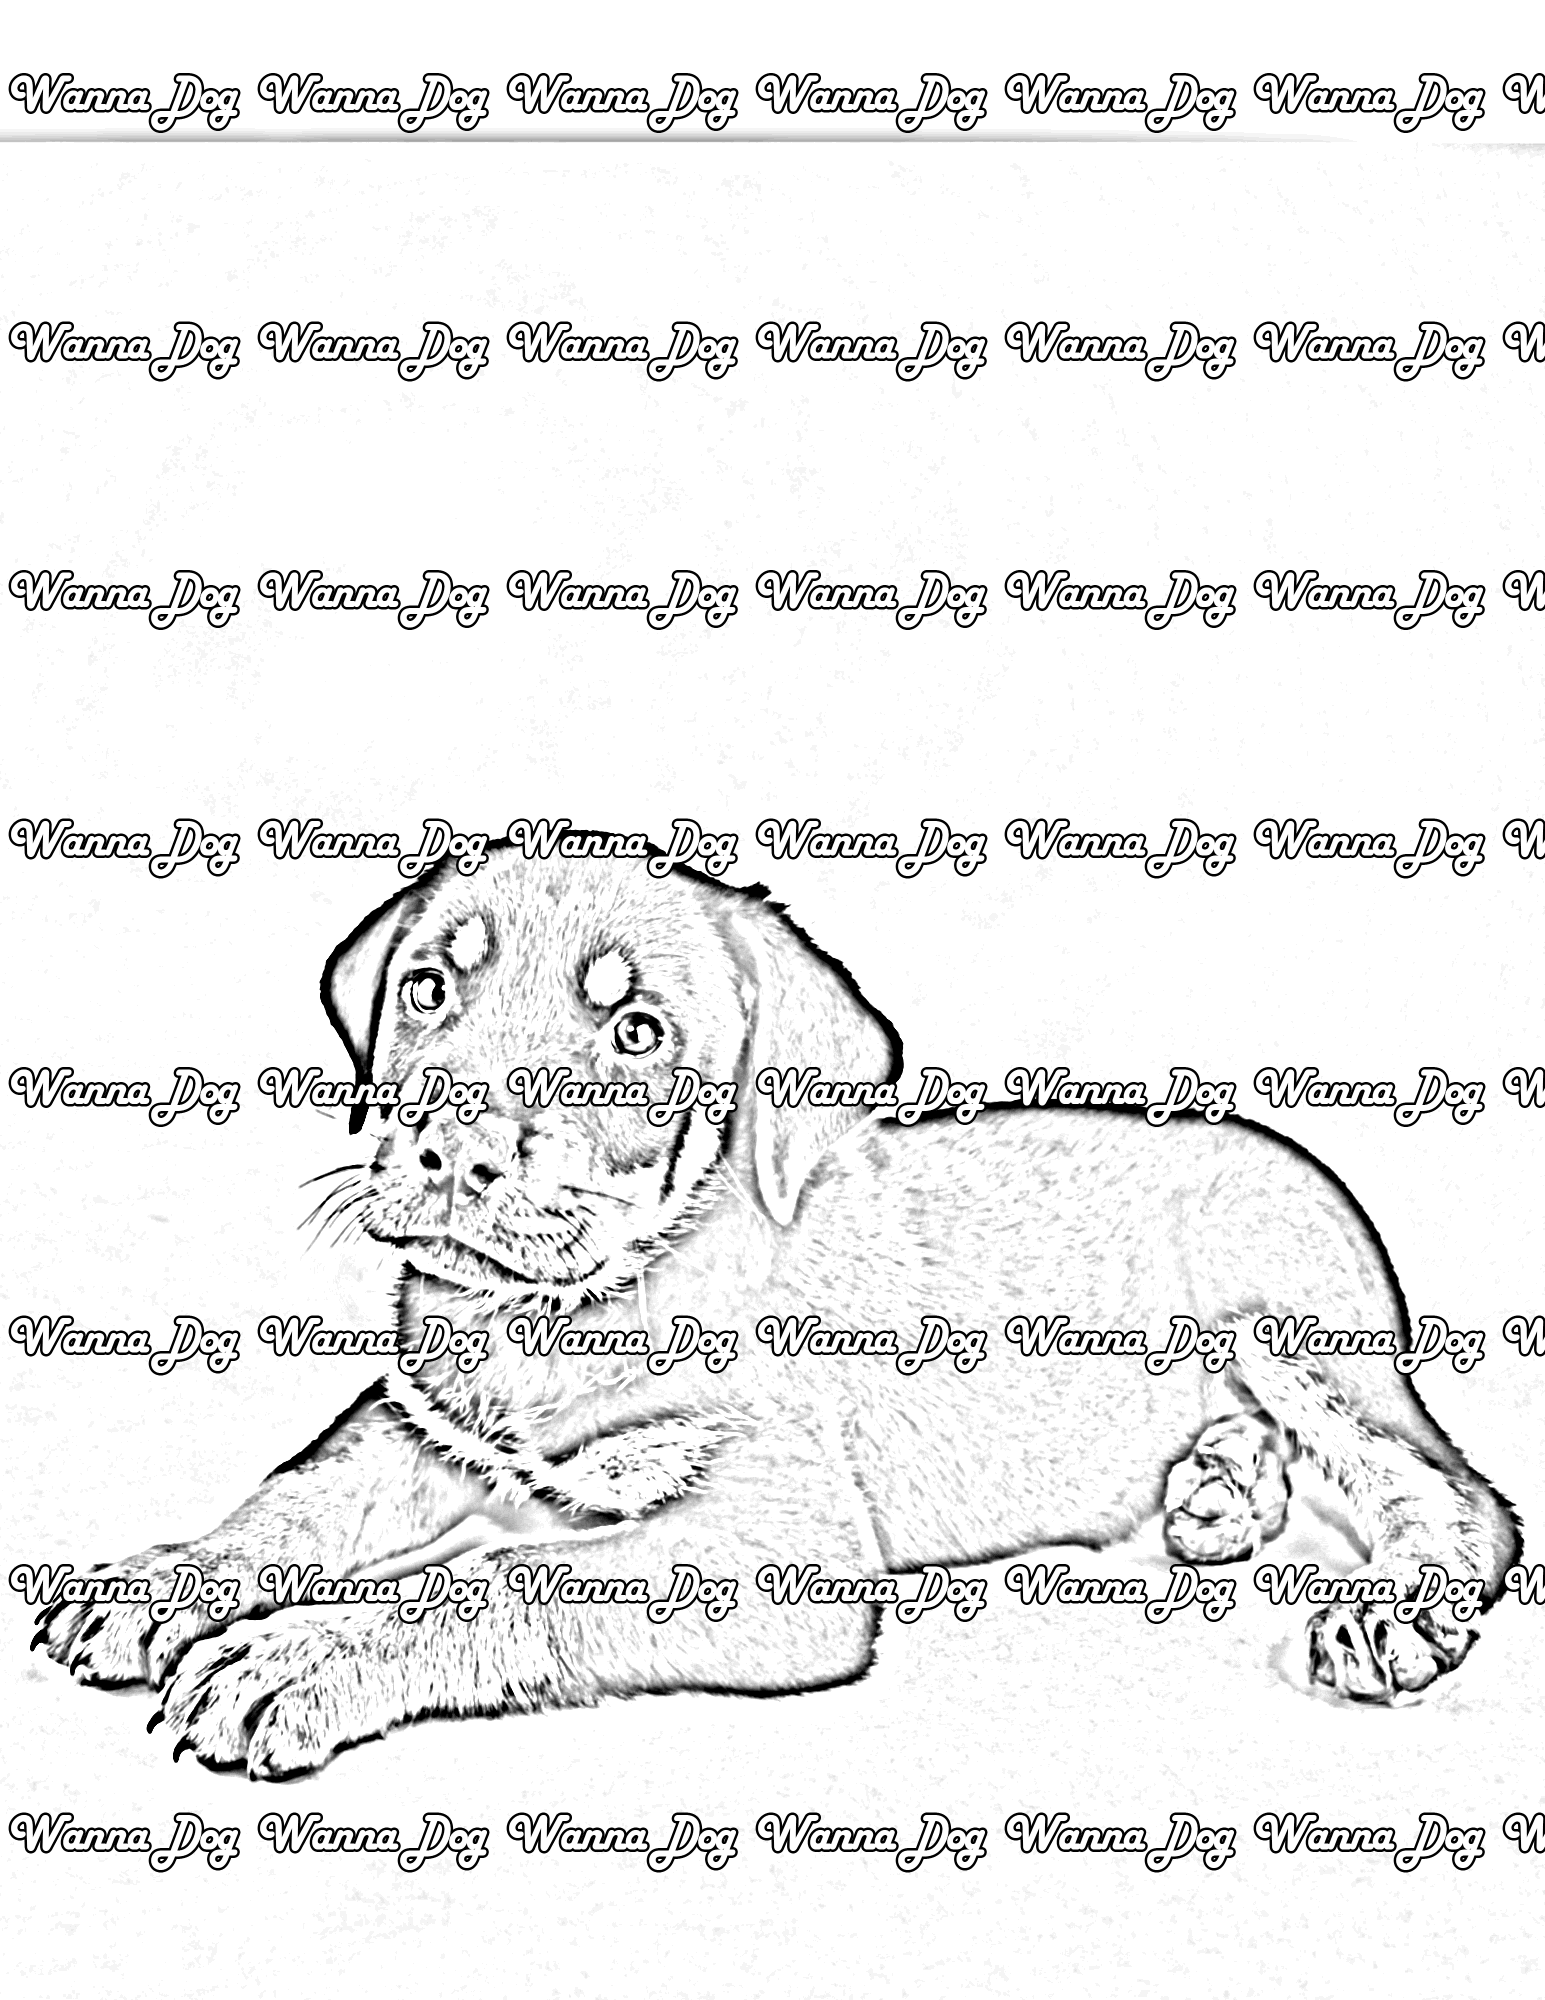 Rottweiler Puppy Coloring Page of a Rottweiler Puppy sitting down and waiting